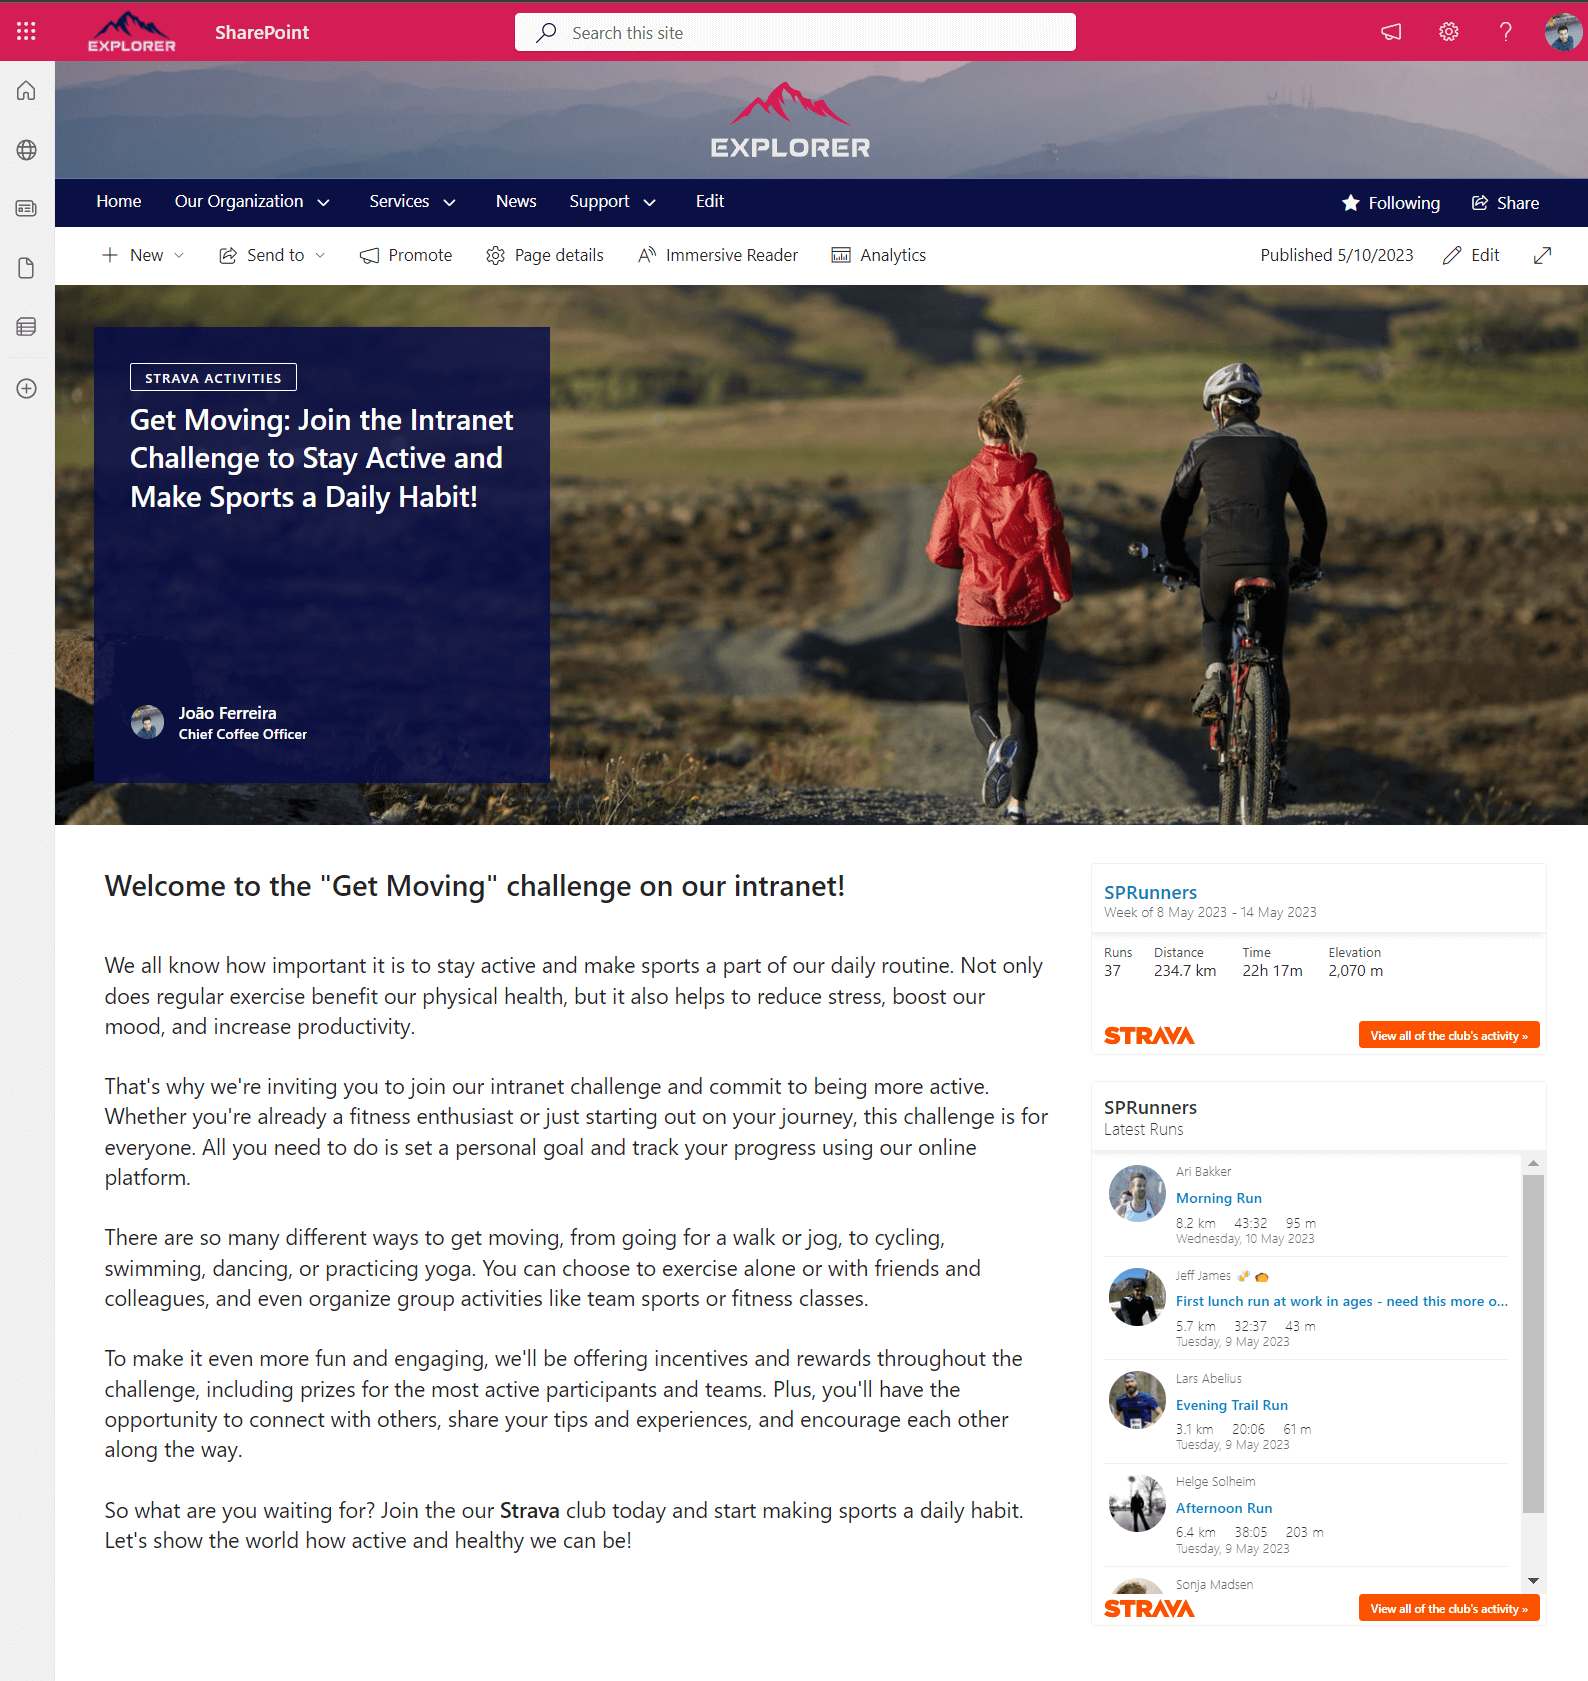 Embed Strava Club activities in a SharePoint page